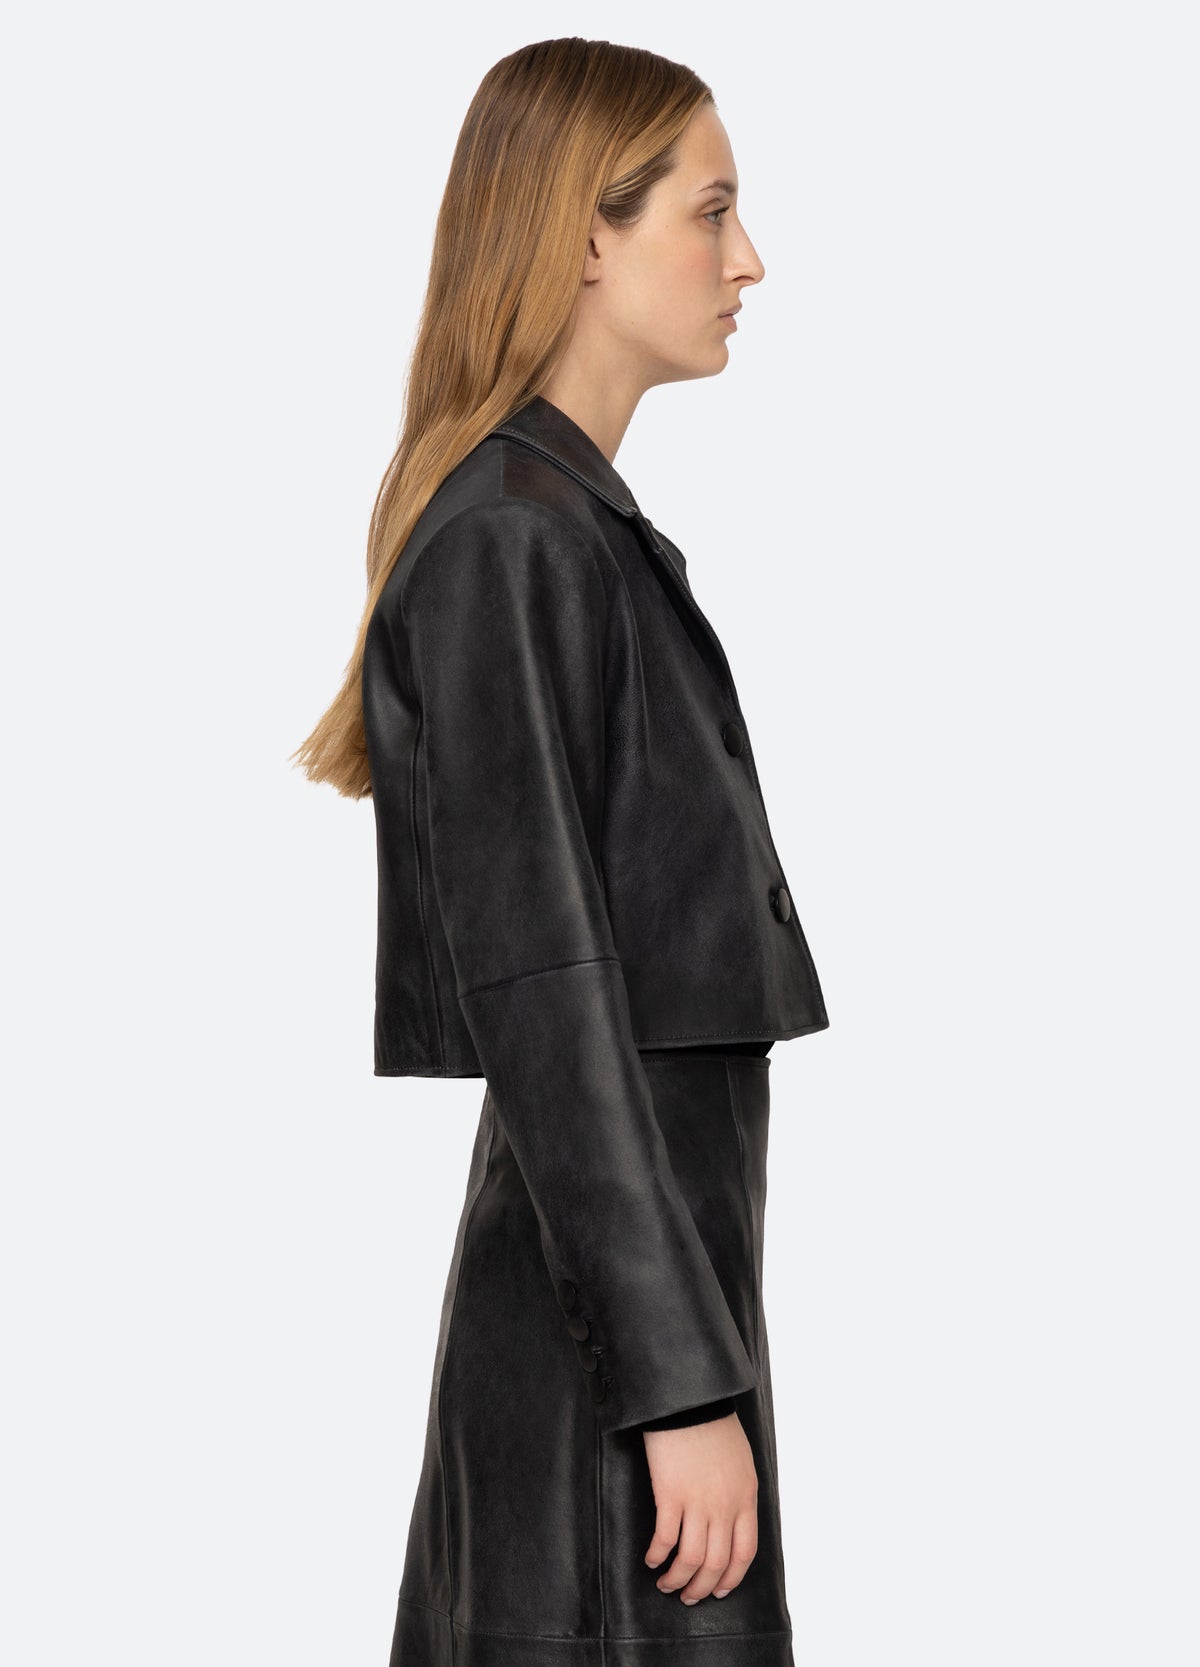 black-andy jacket-side view - 4